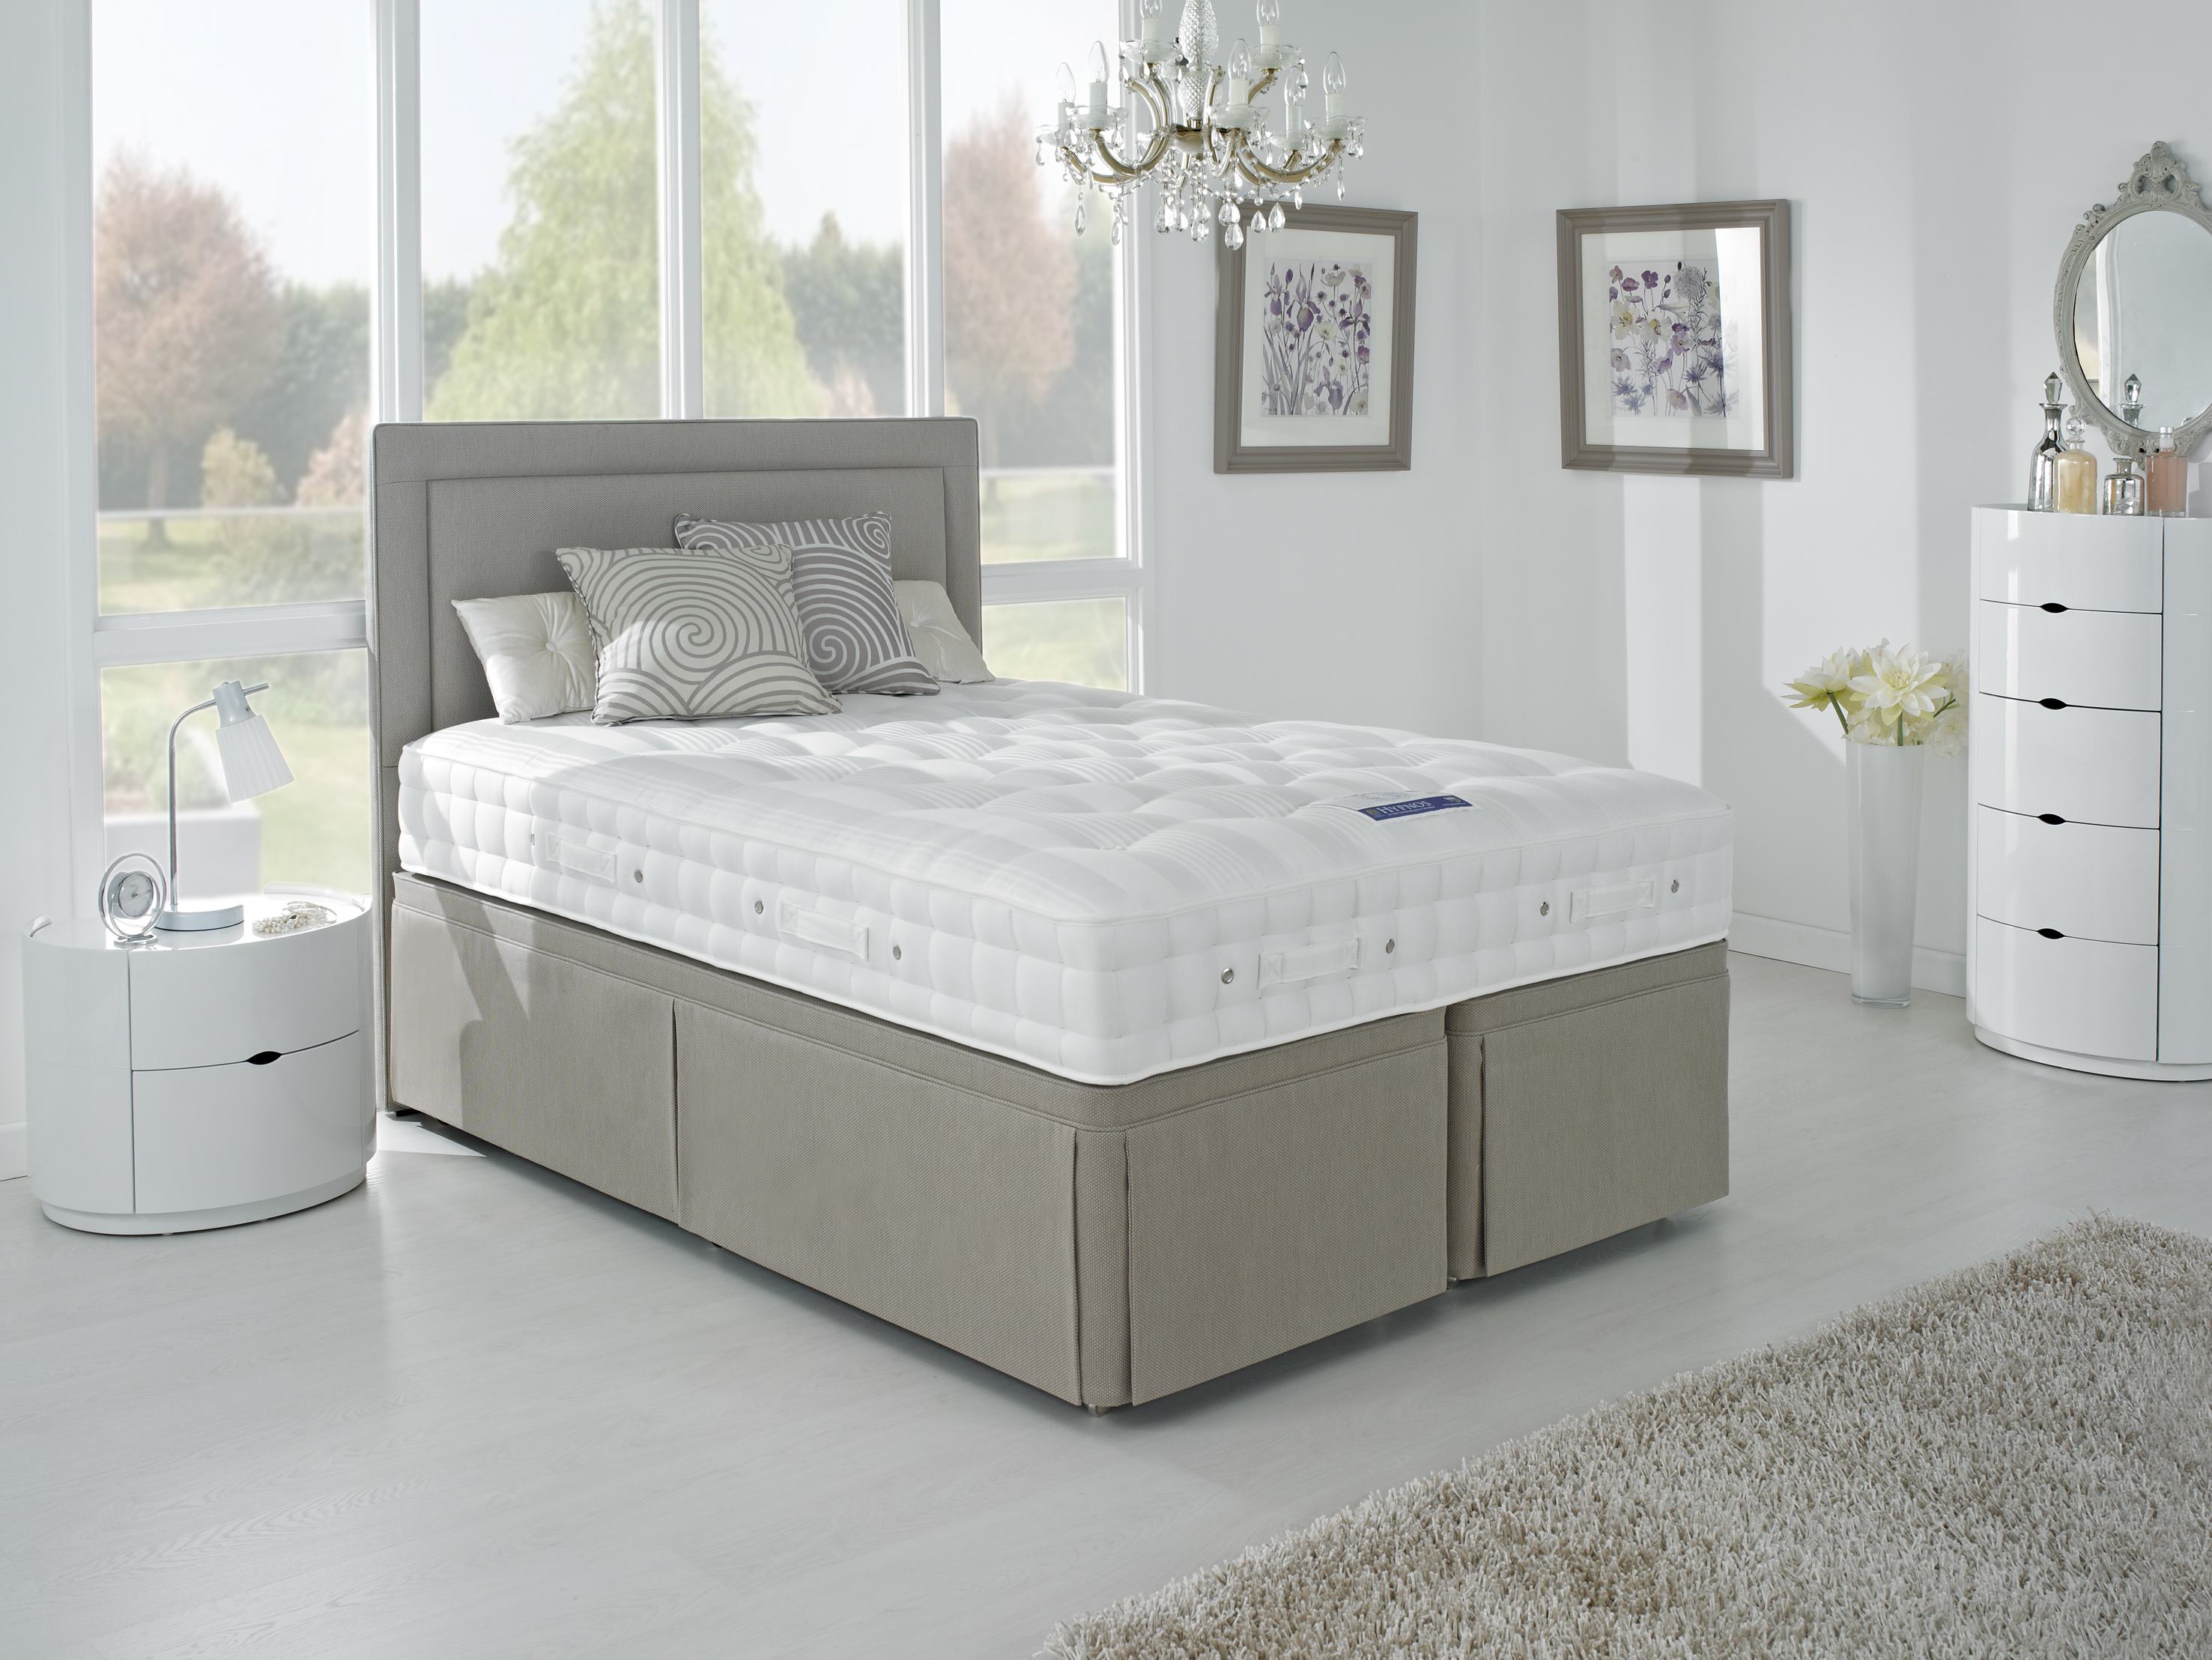 Hypnos Orthocare 12 Divan Bed